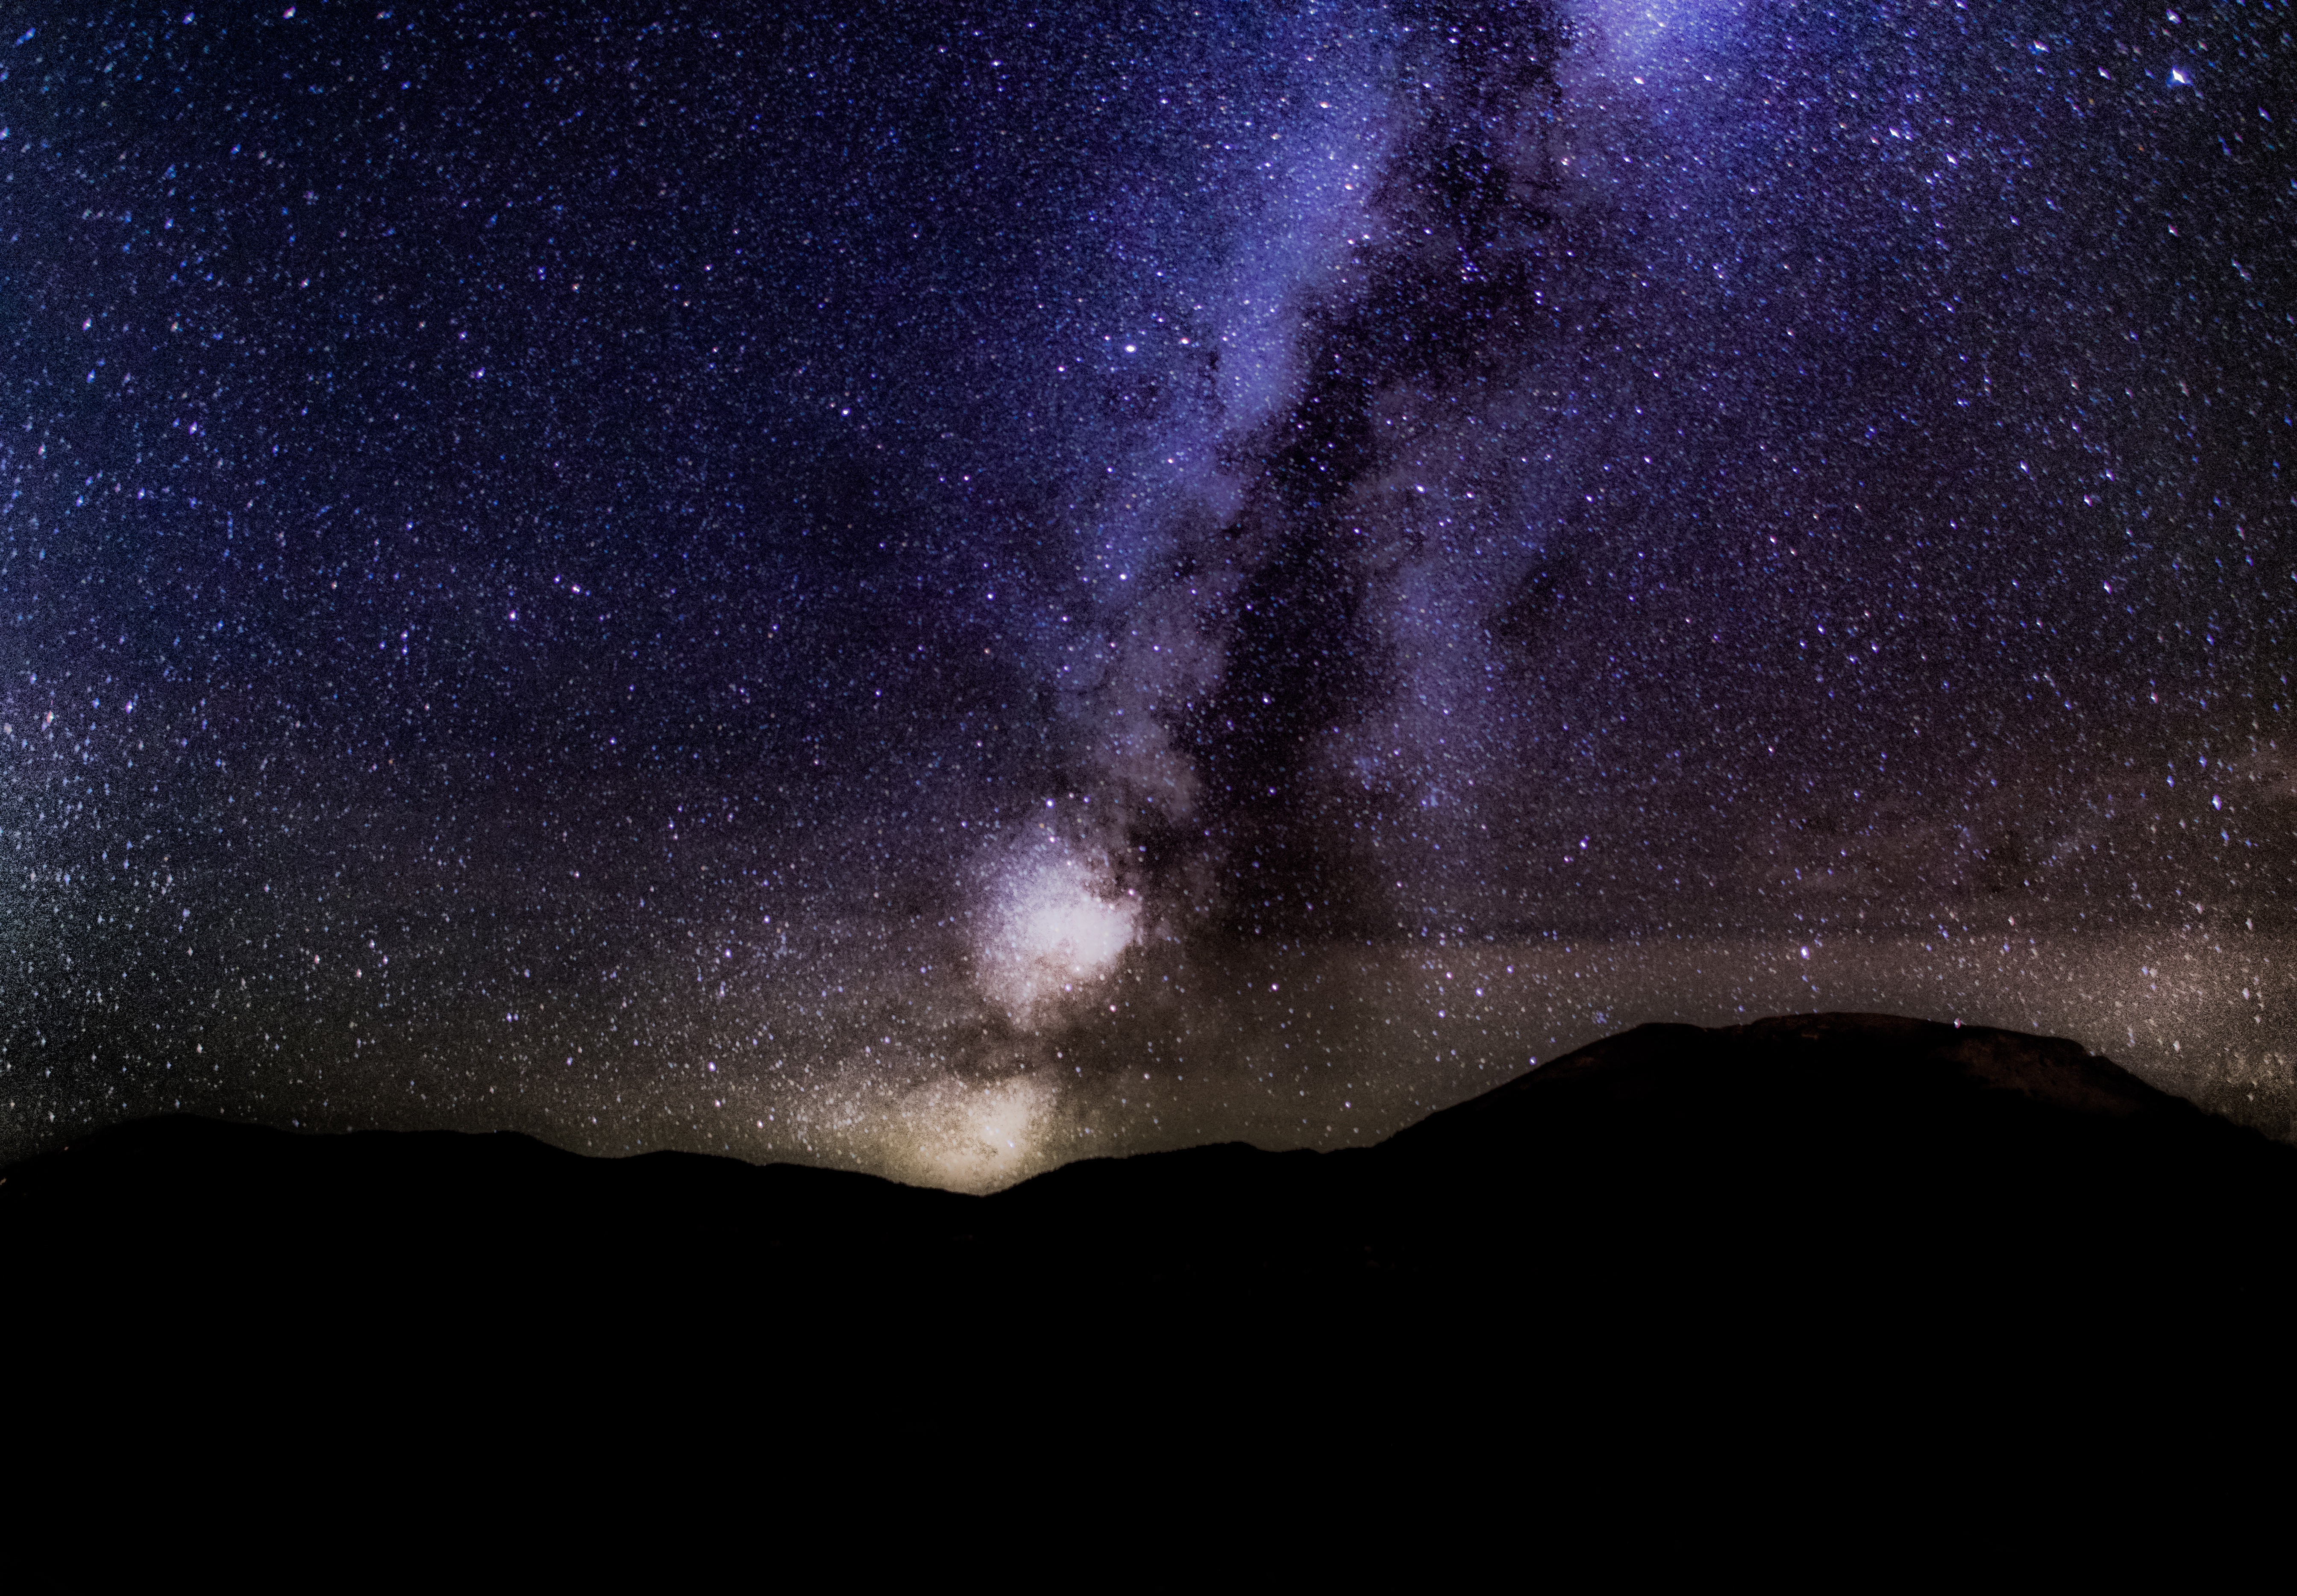 Milky Way. Photo by Nathan Anderson, Unsplash.